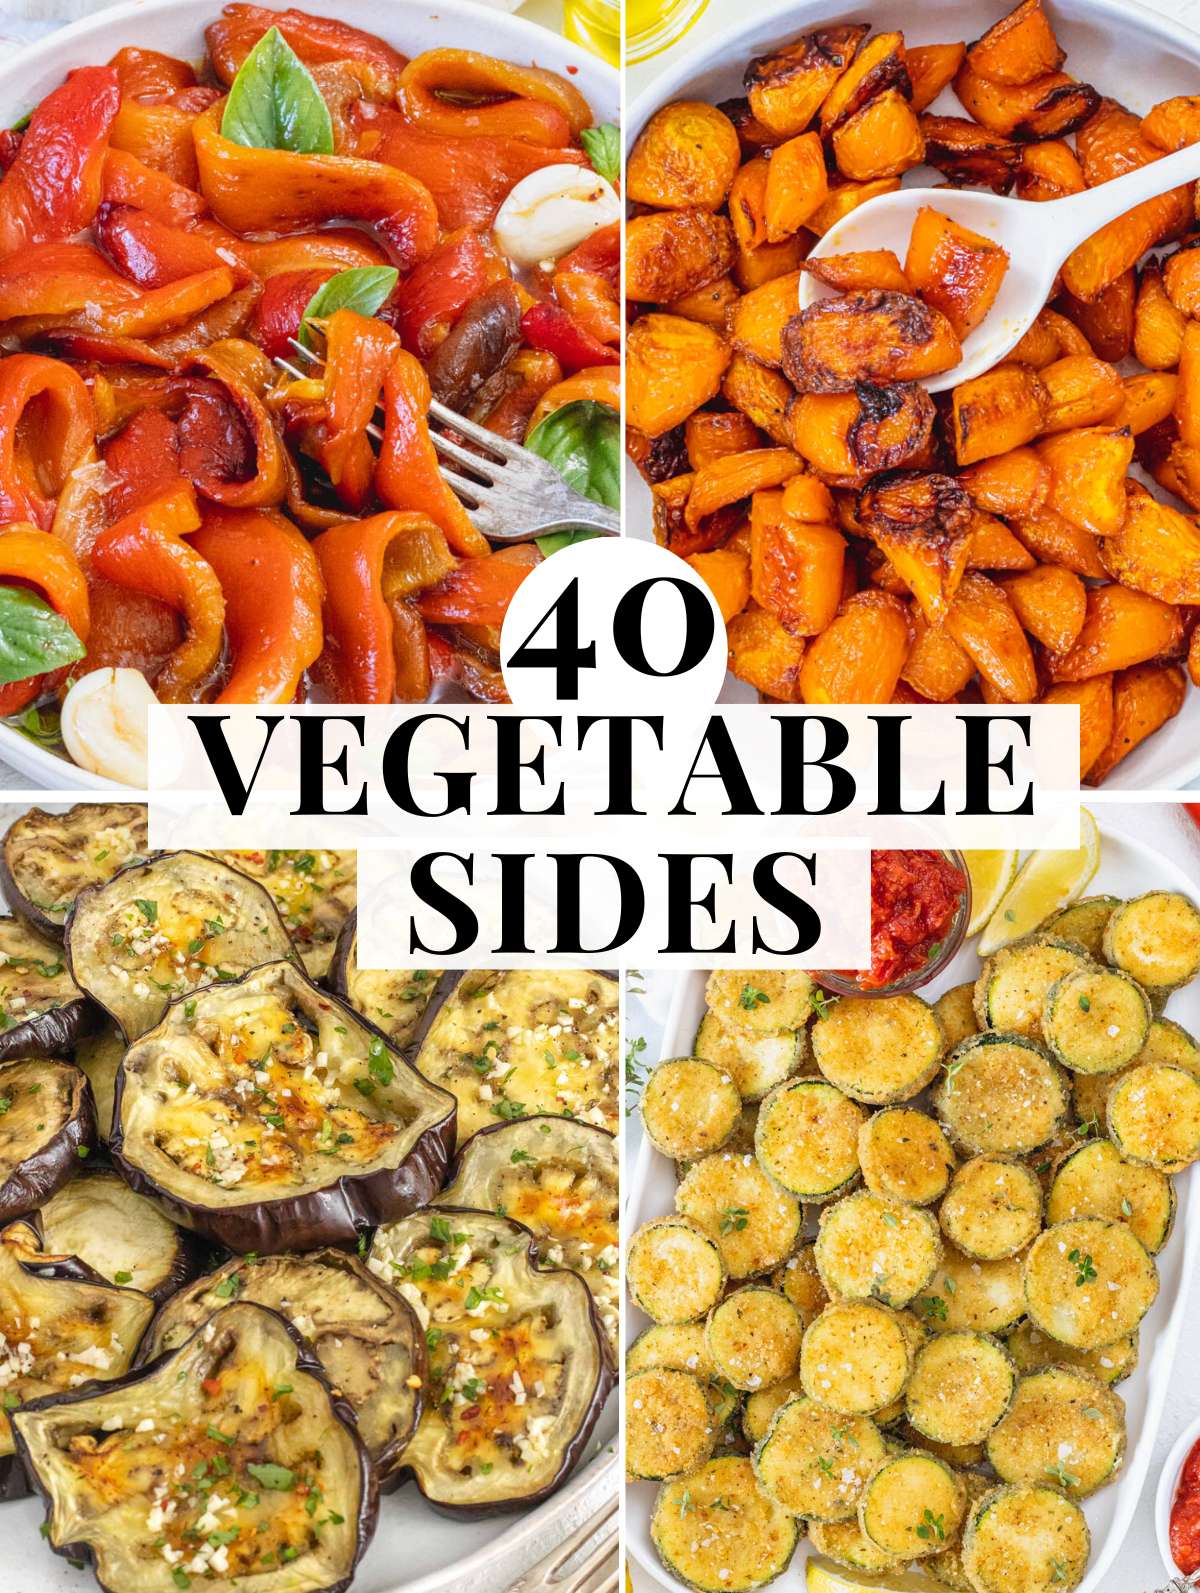 Vegetable sides to serve with protein